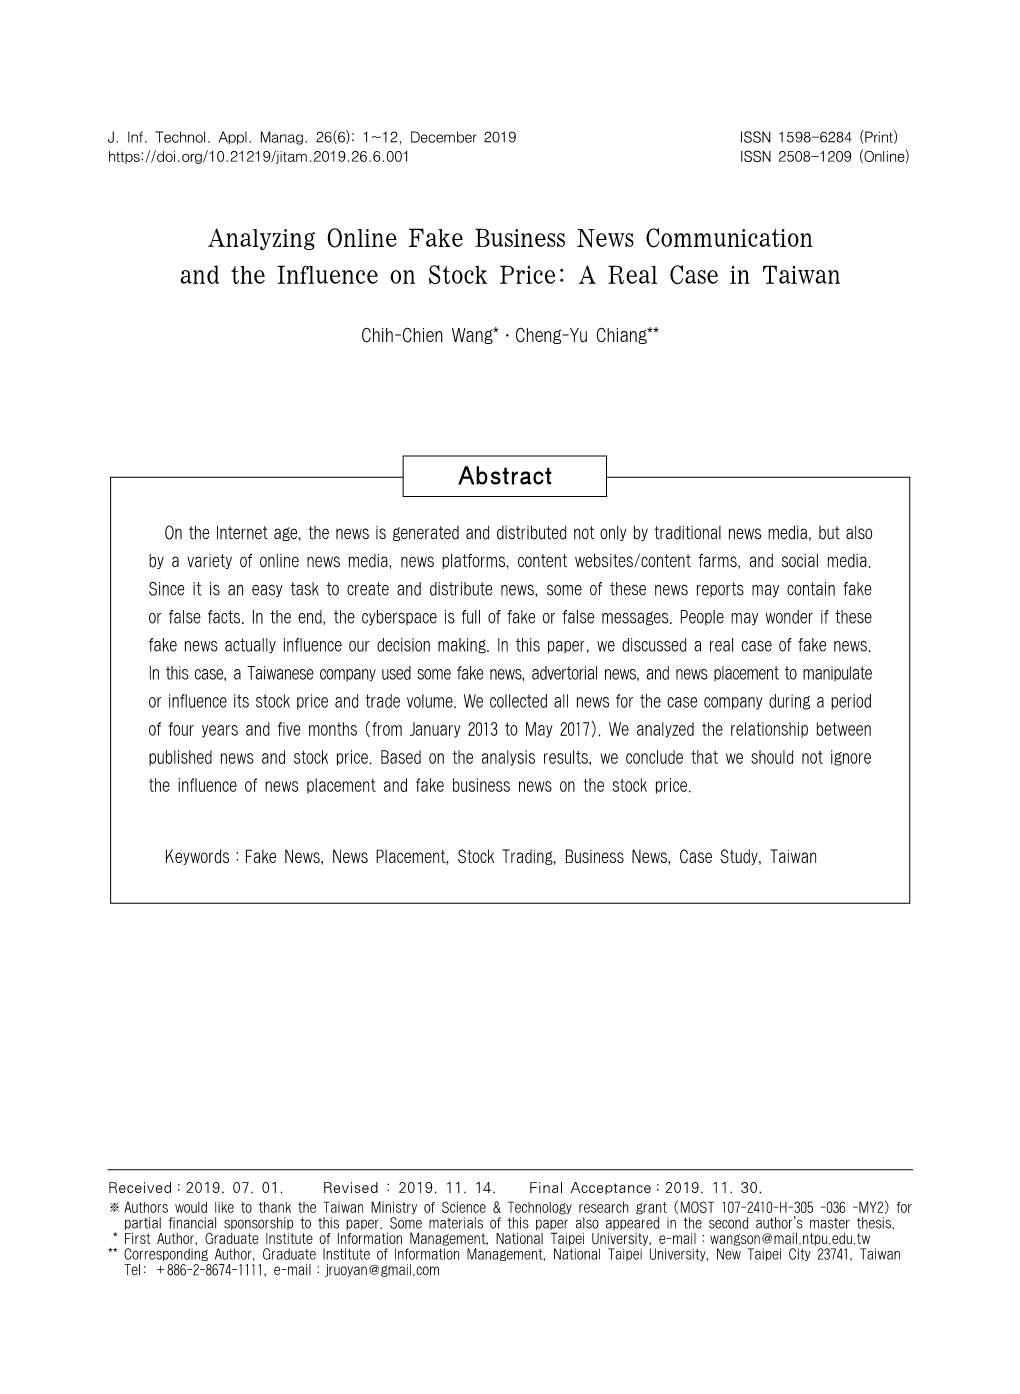 Analyzing Online Fake Business News Communication and the Influence on Stock Price: a Real Case in Taiwan